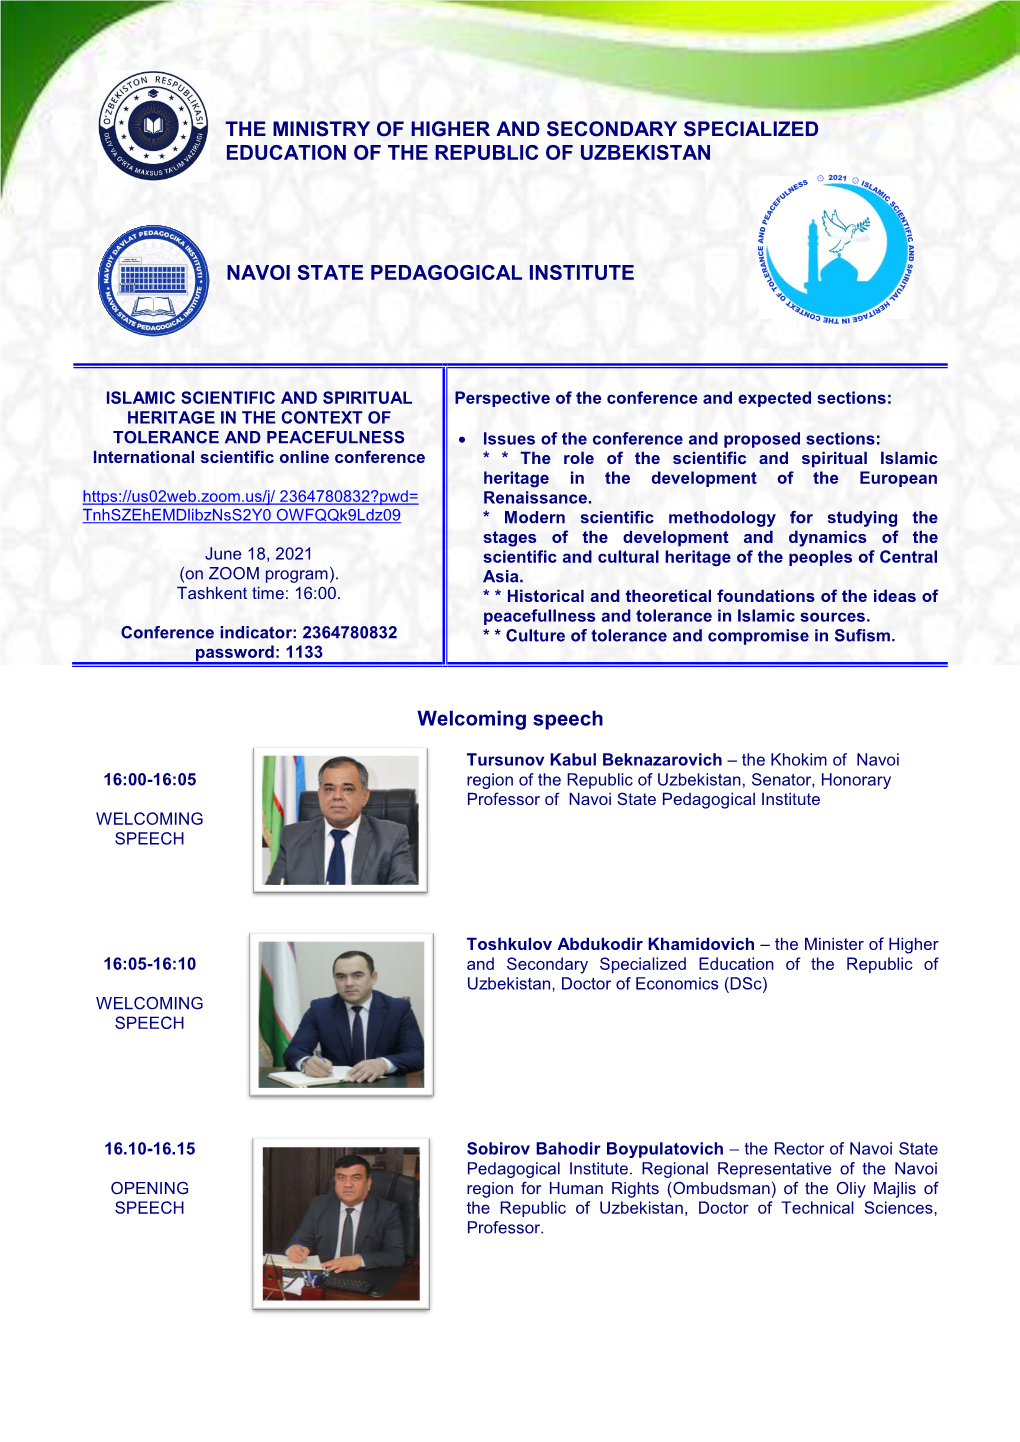 The Ministry of Higher and Secondary Specialized Education of the Republic of Uzbekistan